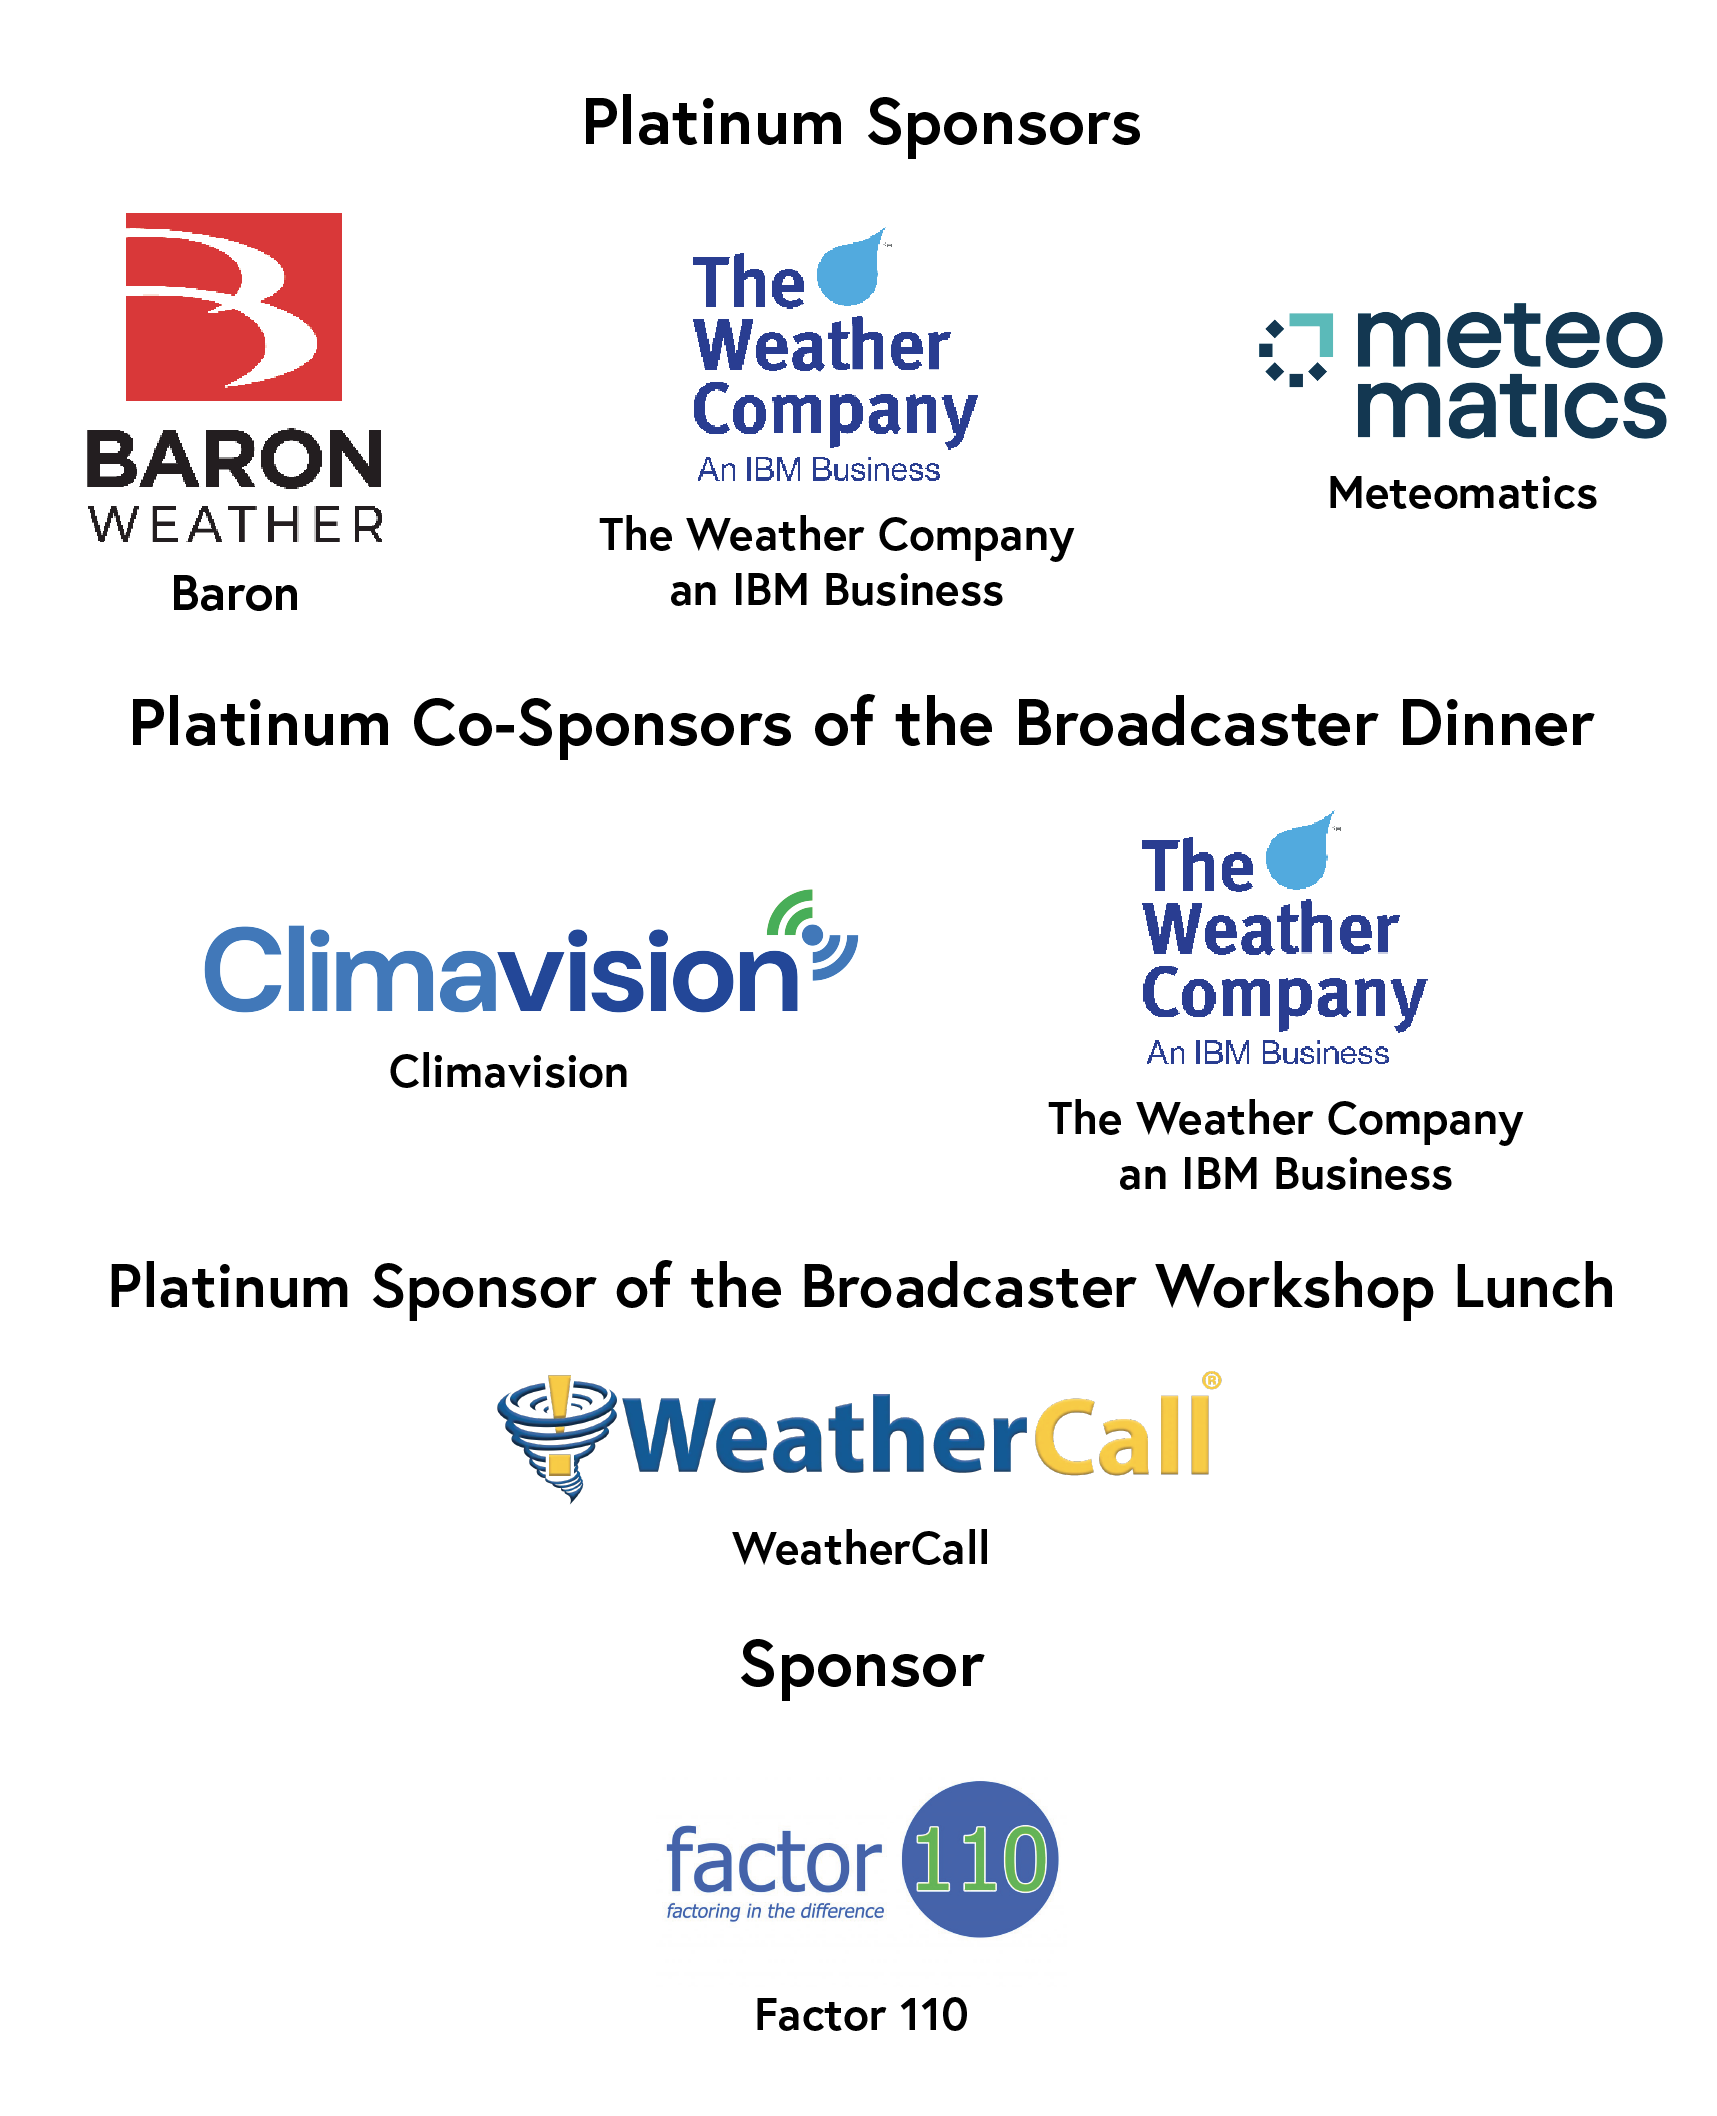 "List of platinum sponsors including Baron, The Weather Company, and Meteomatics, as well as co-sponsors Climavision and WeatherCall, with an additional sponsor, Factor 110."